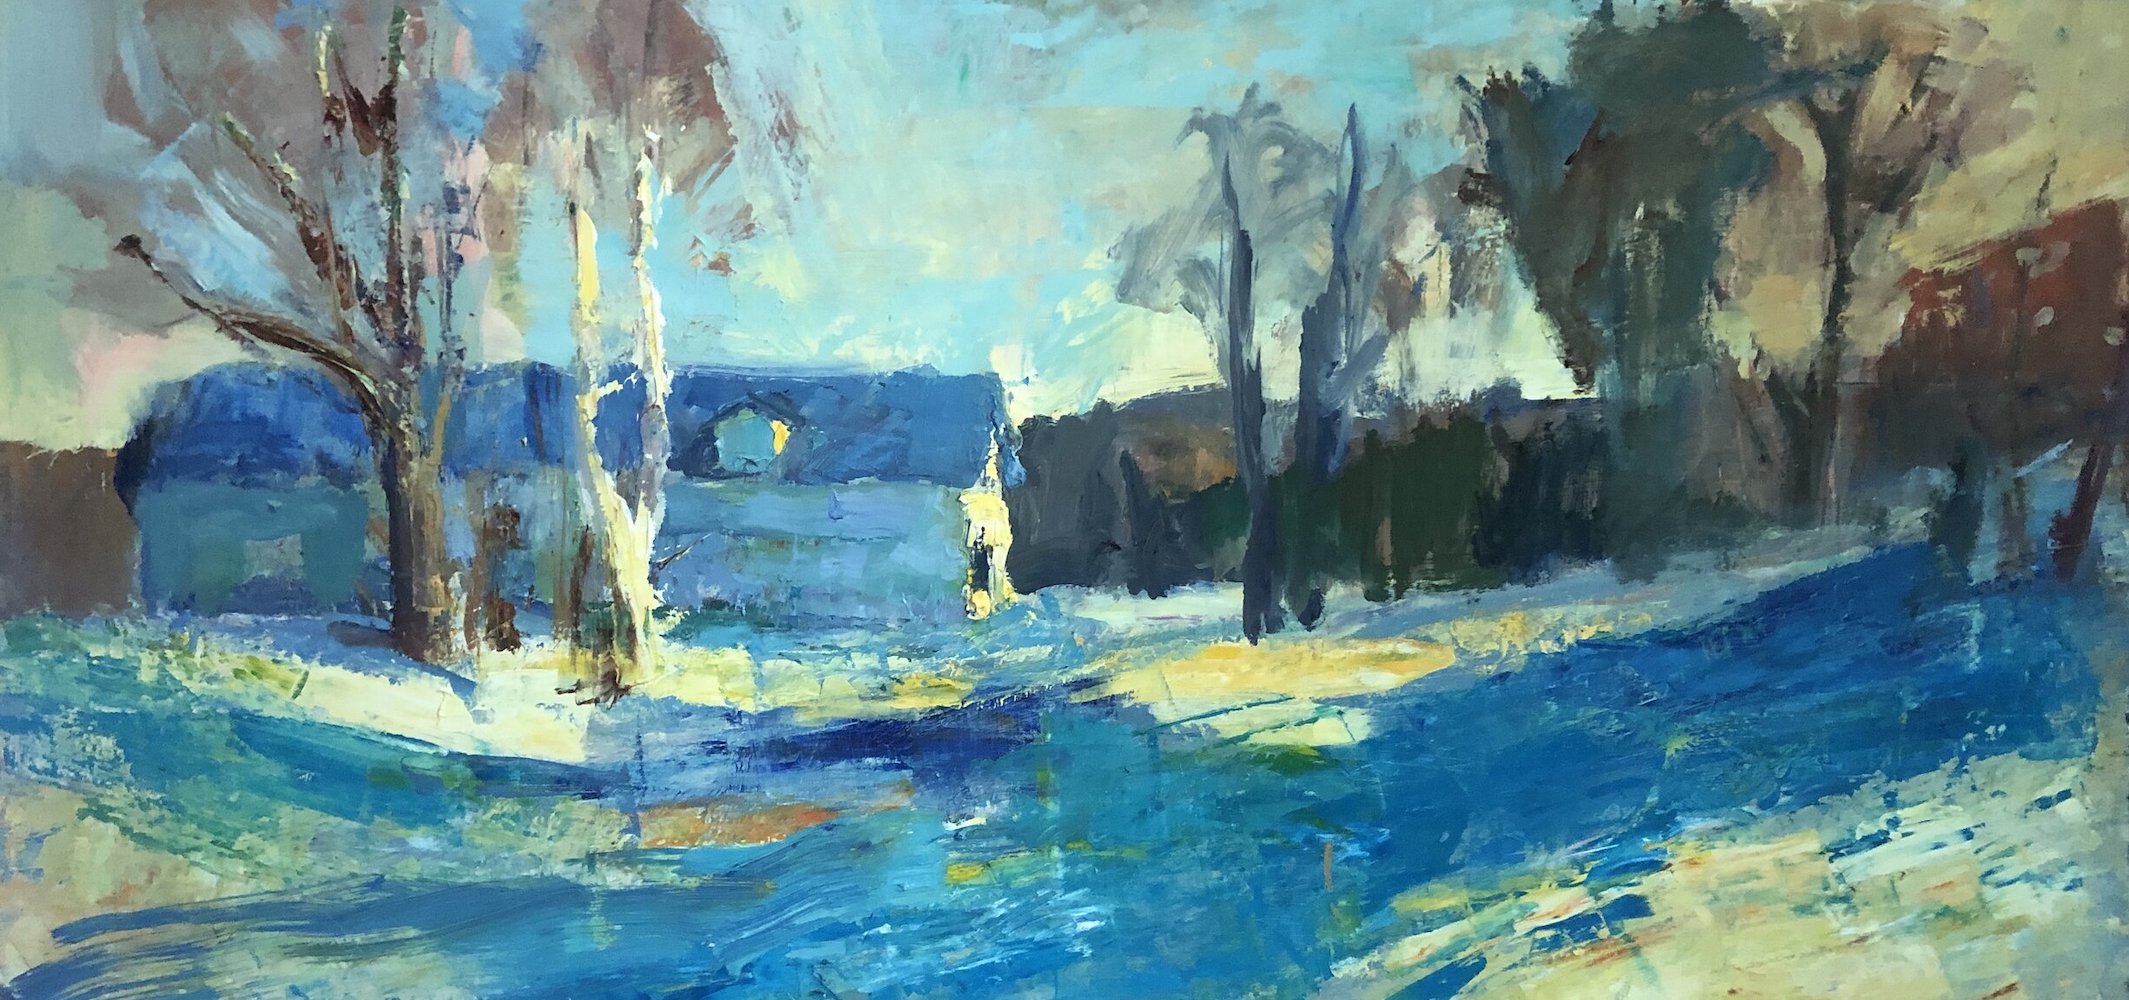 The Warming, Plein Air Oil Painting by Mary Giammarino